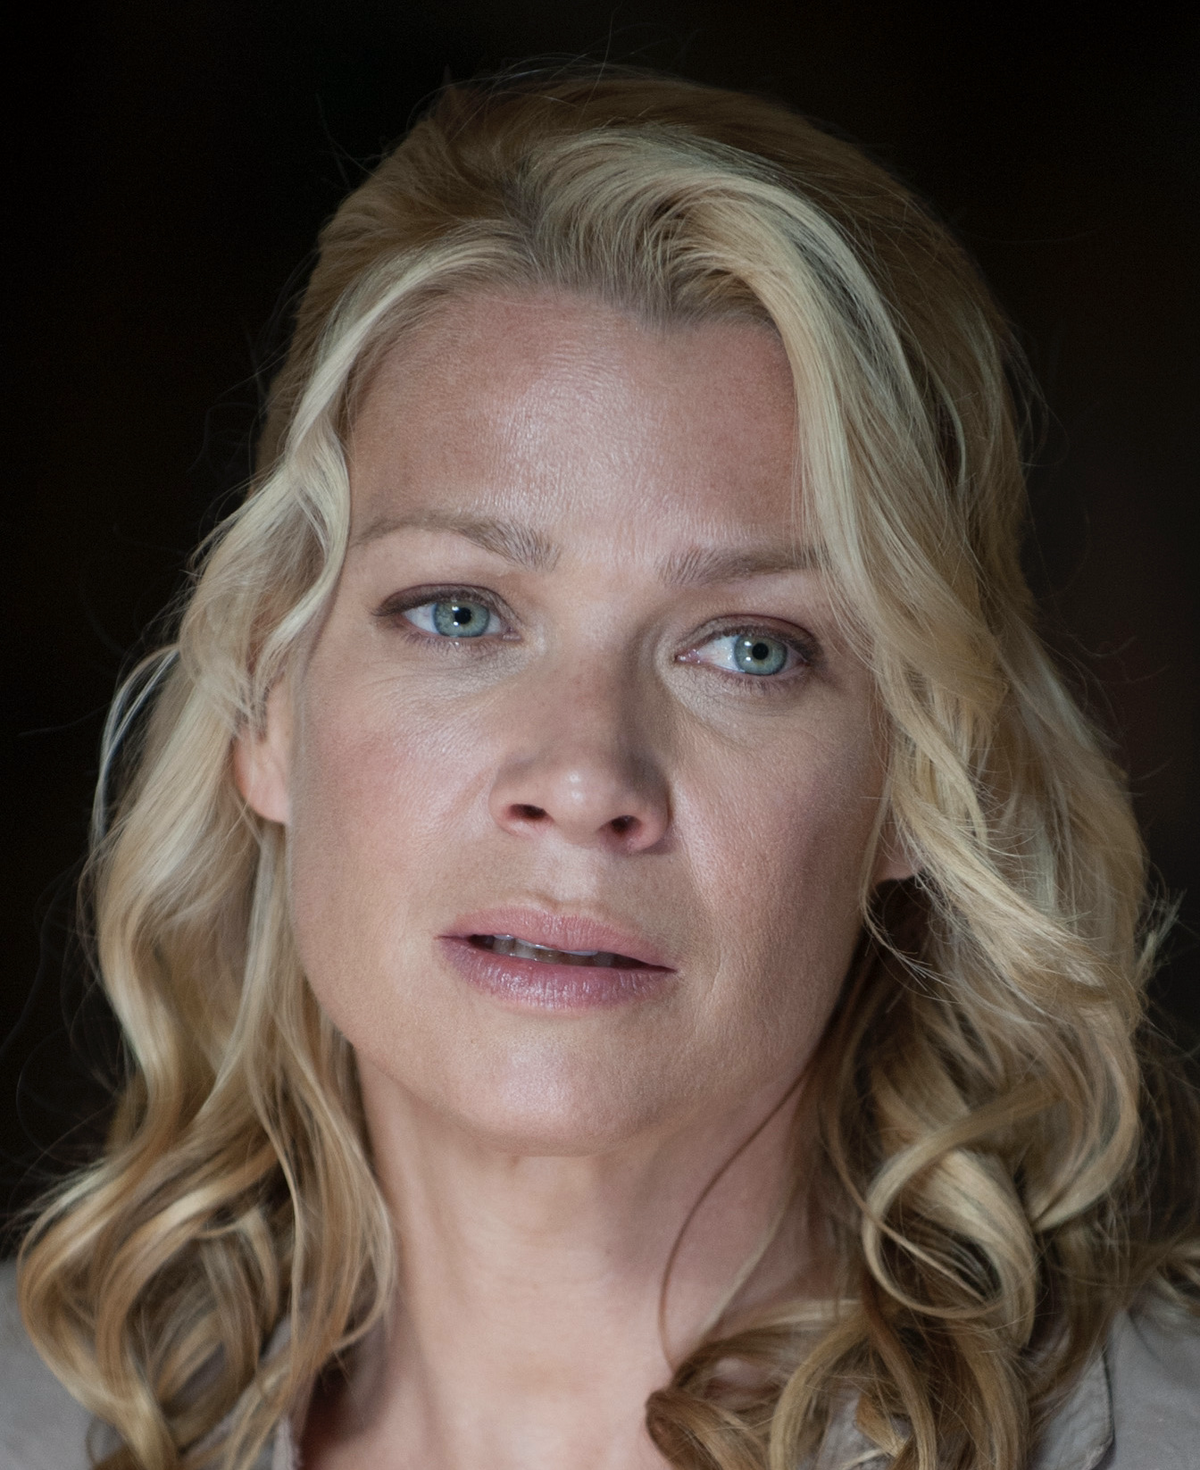 Walking Dead Spin-Off: Meet the Survivors (Including a New 'Andrea')!